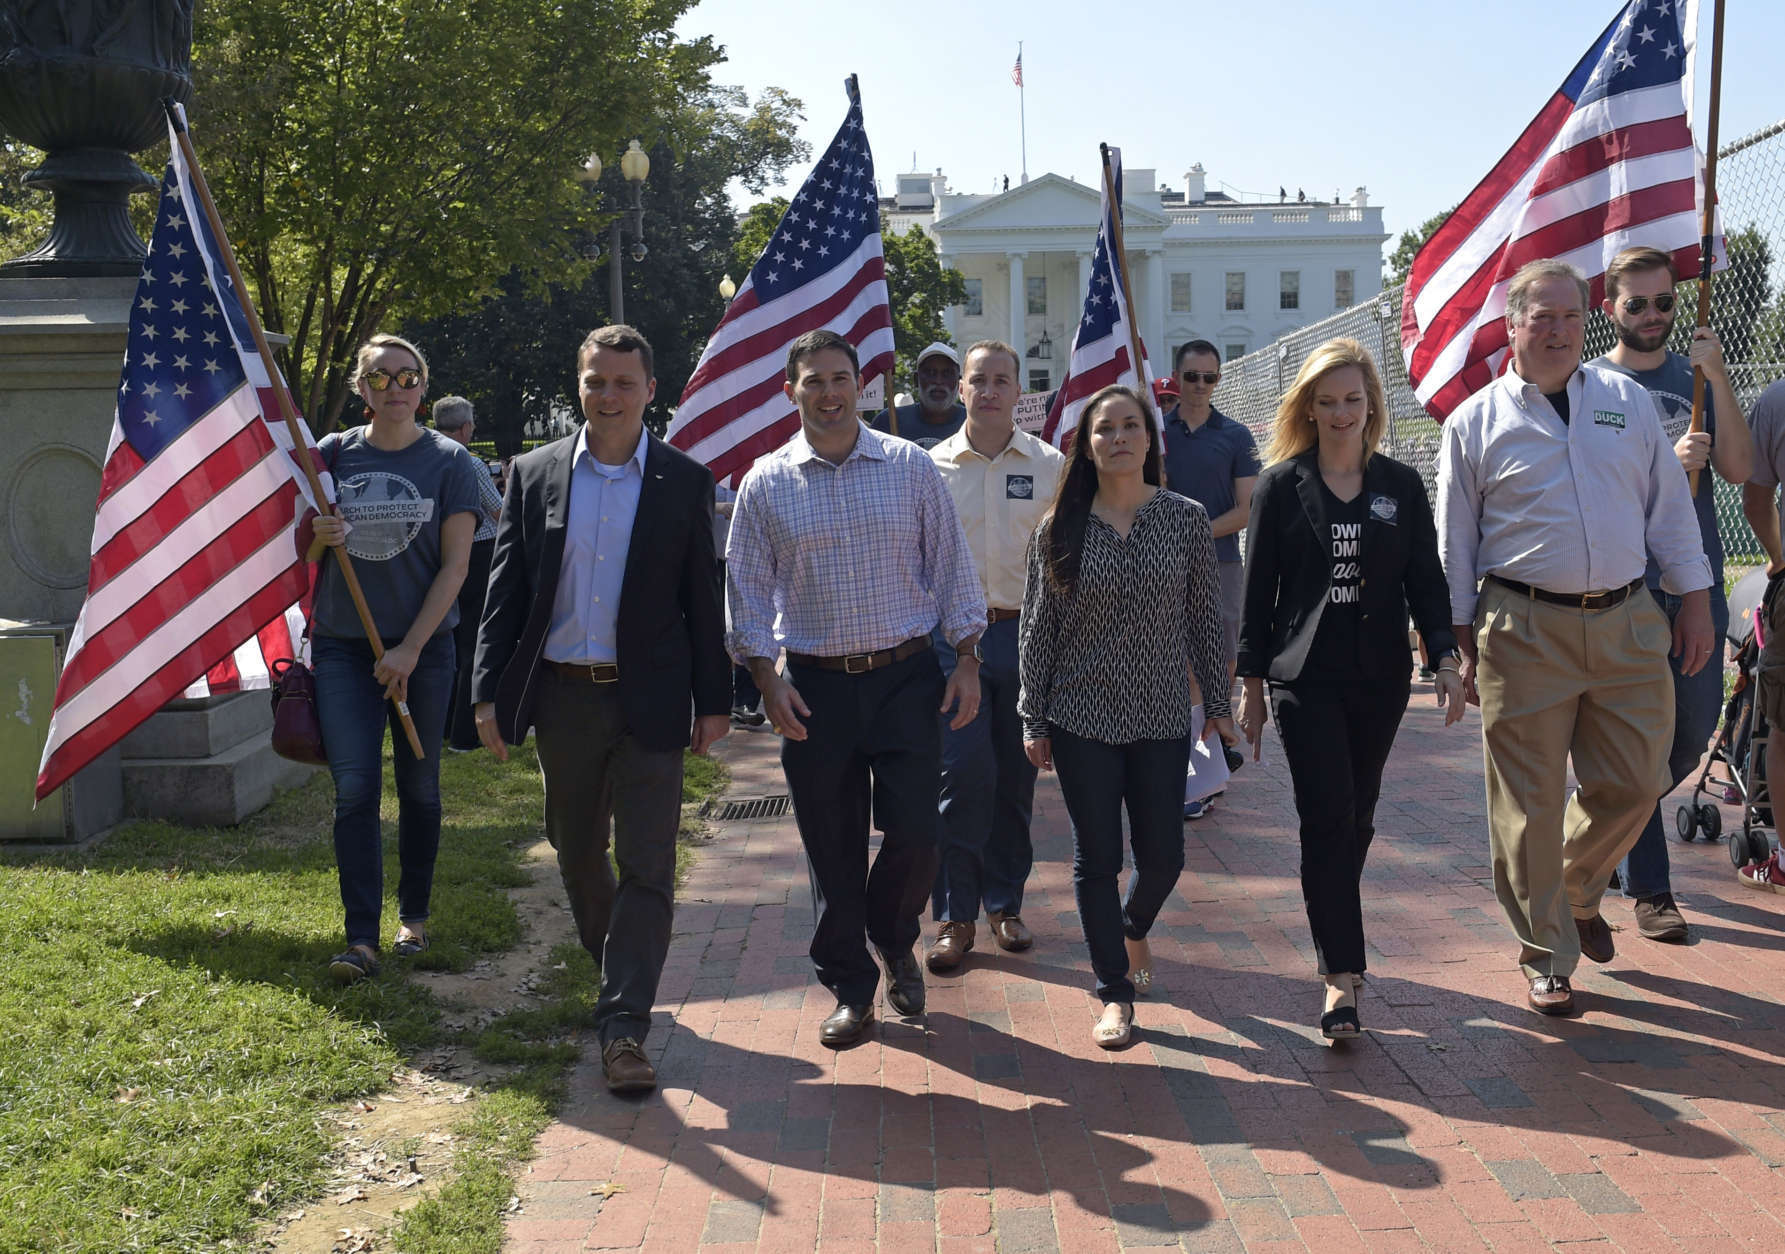 Protesters march from the White House to the Russian ambassador's residence in Washington, Saturday, Sept. 16, 2017, during a rally encouraging President Donald Trump and House Speaker Paul Ryan to defend American democracy from Russian interference. (AP Photo/Susan Walsh)